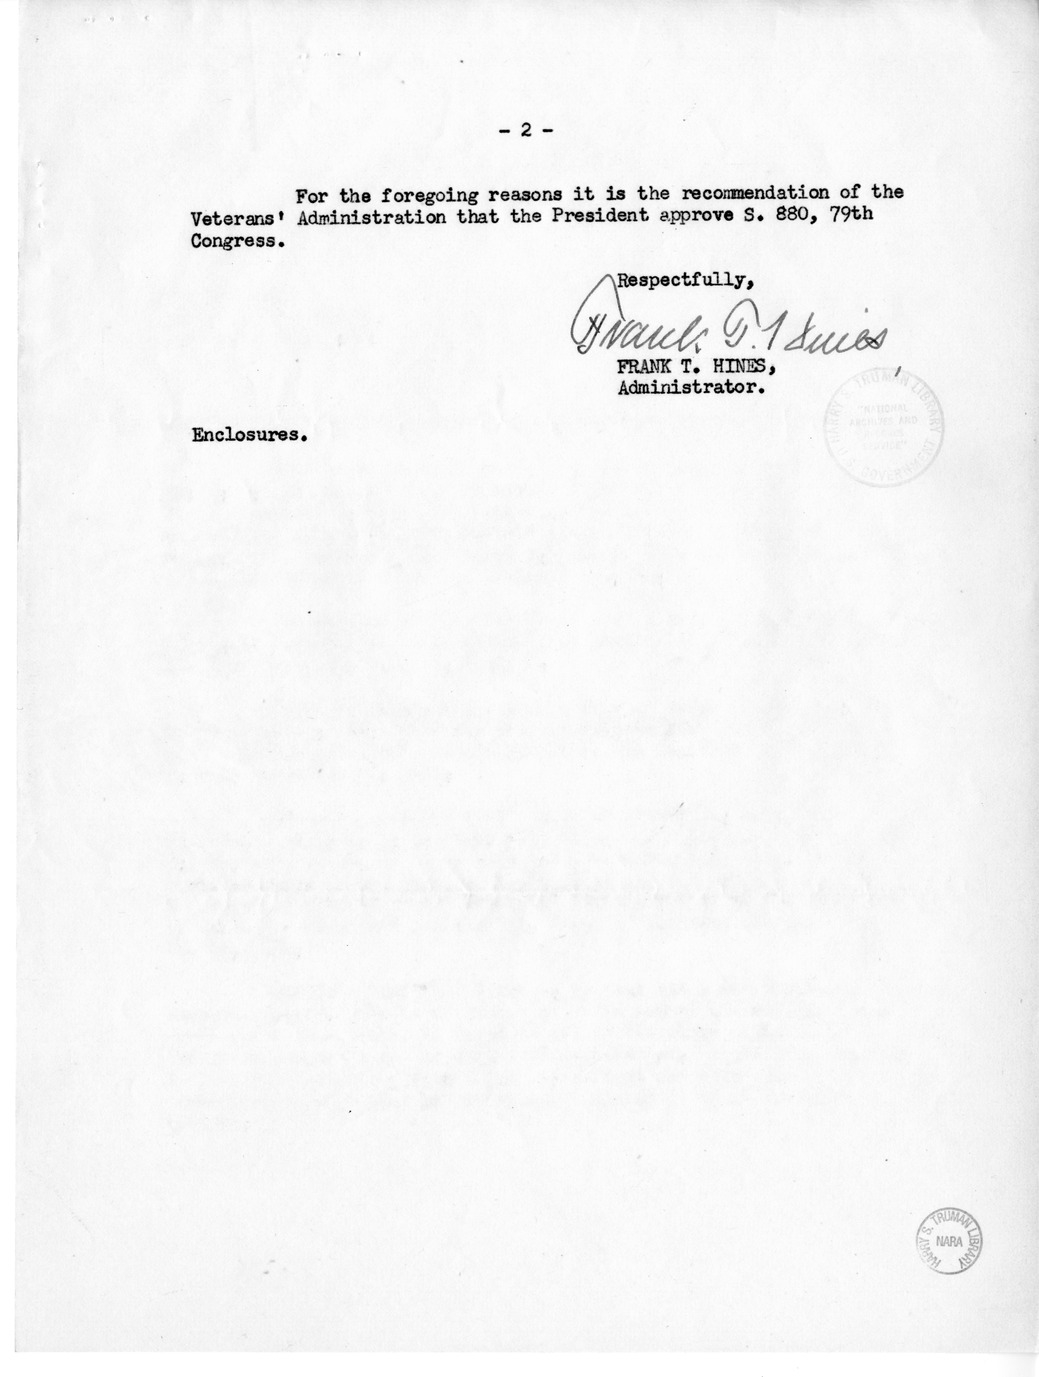 Memorandum from Frederick J. Bailey to M. C. Latta, S. 880, To Provide for Designation of the United States Veterans' Administration Hospital at Sioux Falls, South Dakota, as the Royal C. Johnson Veterans Memorial Hospital, with Attachments